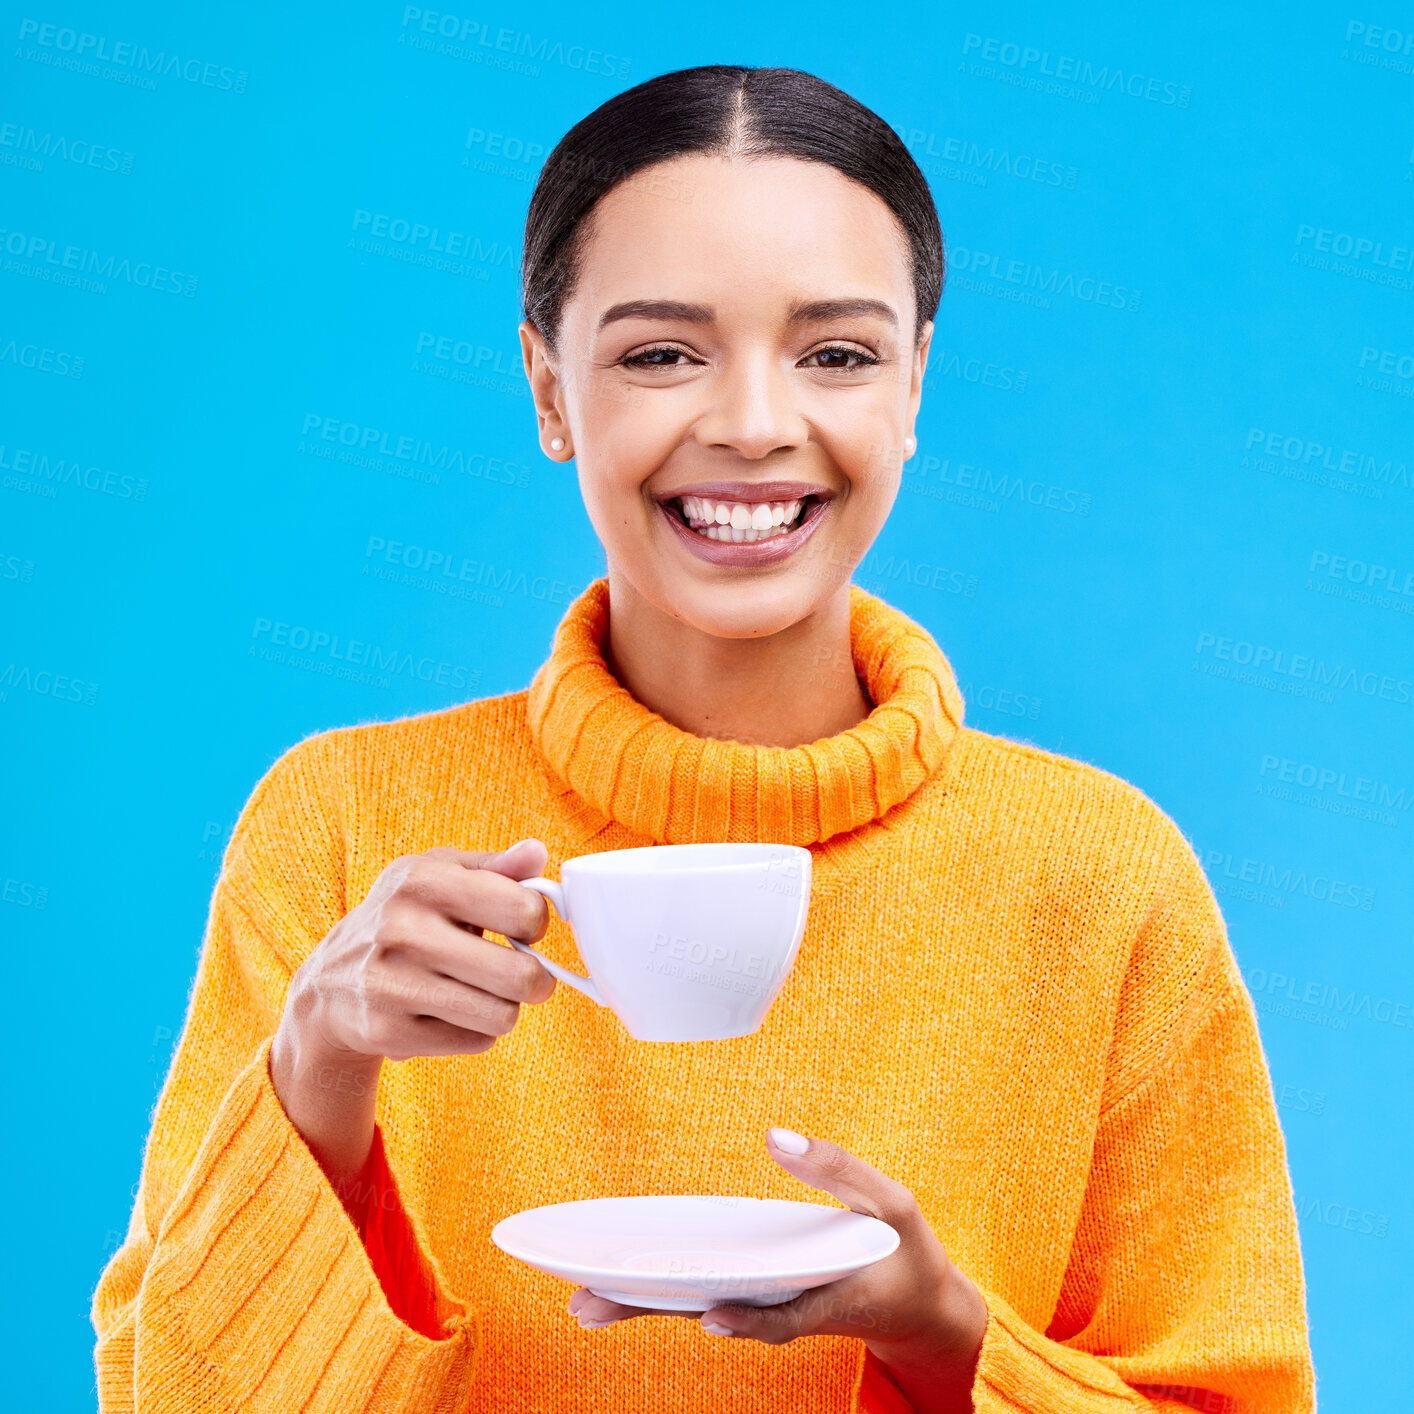 Buy stock photo Tea, woman portrait and smile in studio with happiness, latte or matcha mug. Isolated, blue background and happy female model or young person smiling with casual winter fashion, joy and coffee drink 